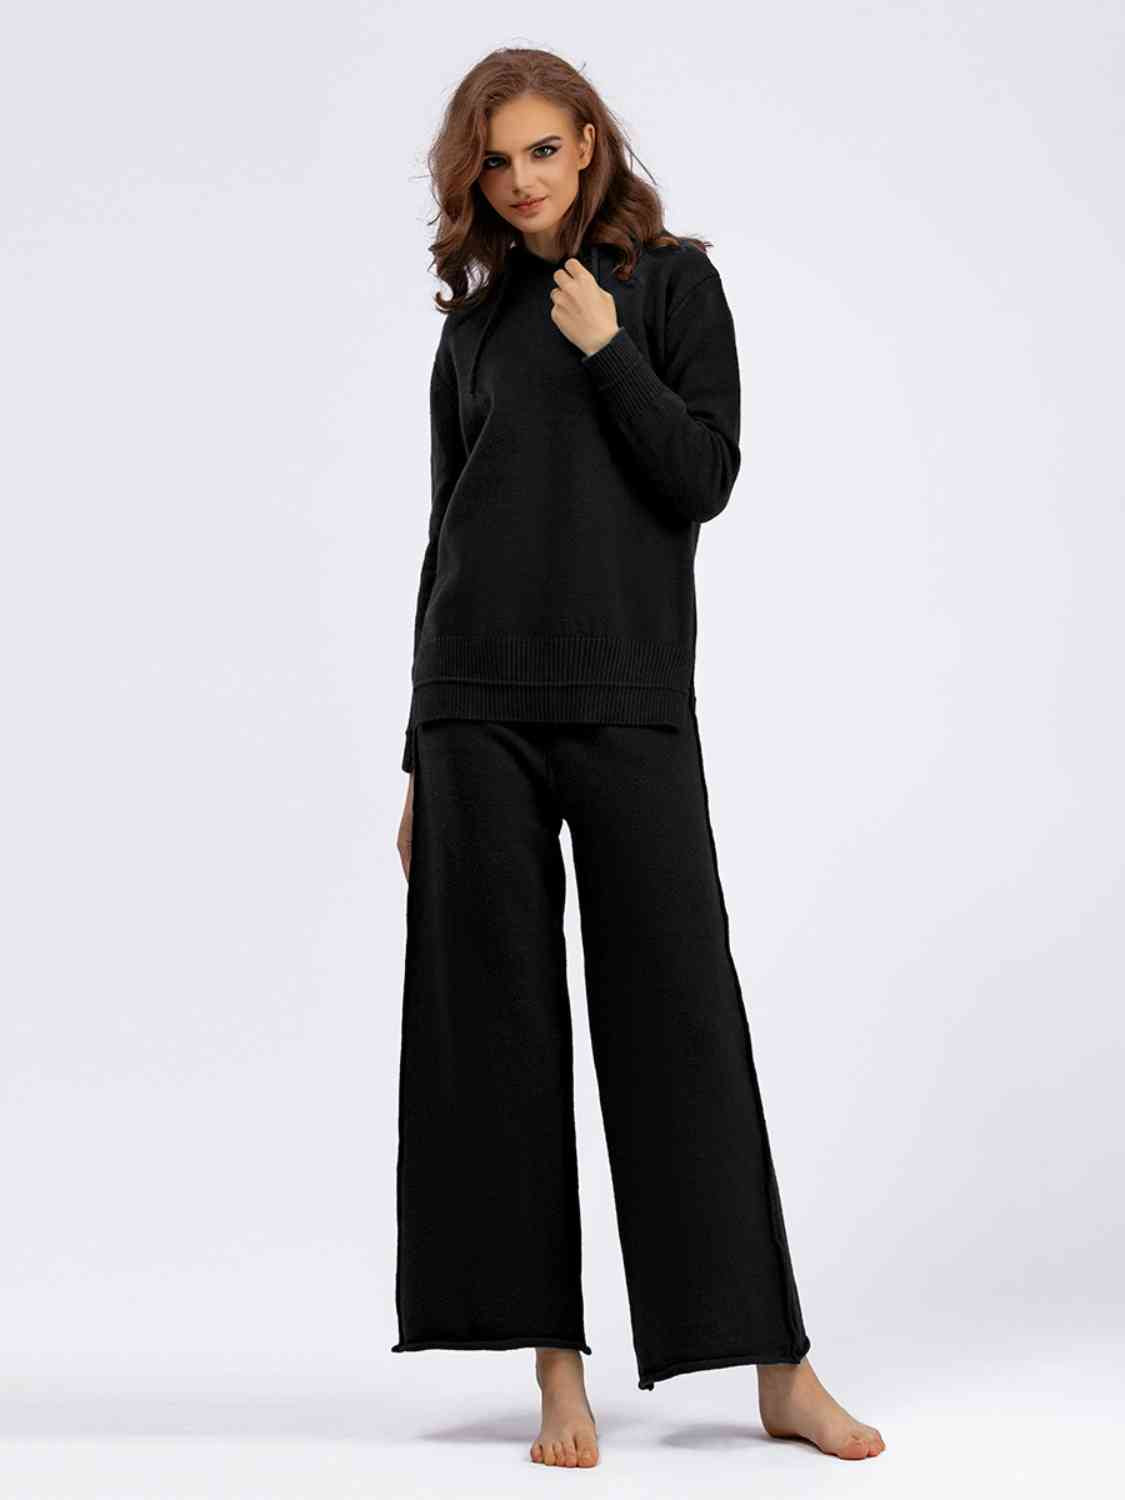 Women's Long Sleeve Hooded Sweater and Knit Pants Set Black One Size